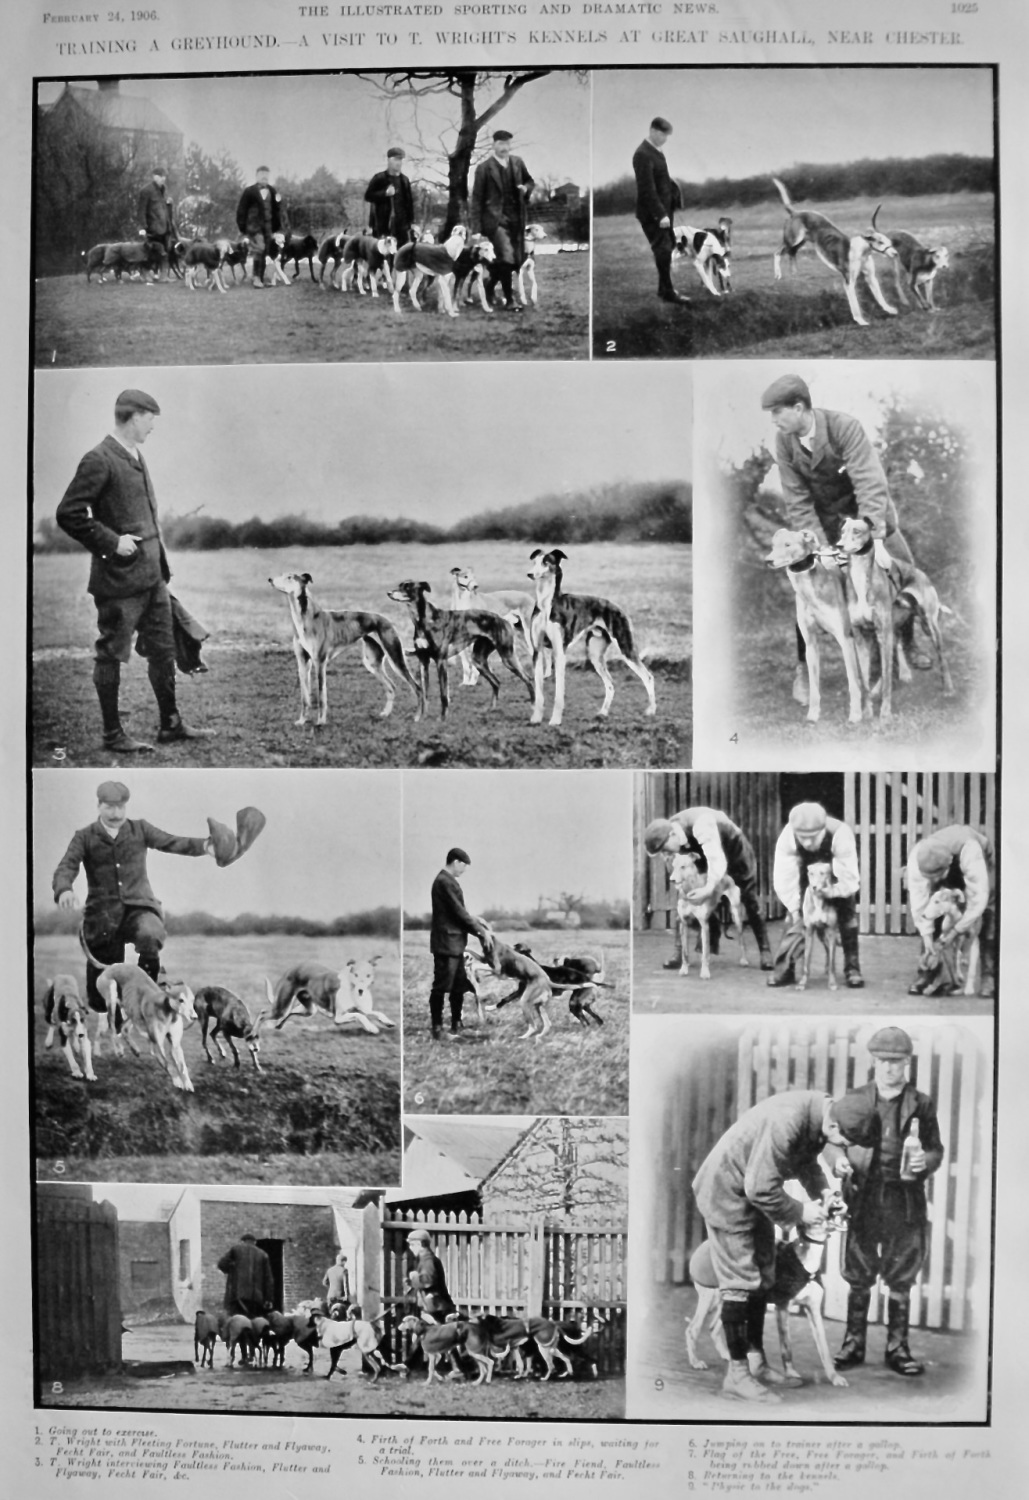 Training a Greyhound.- A Visit to T. Wright's Kennels at Great Saughall, ne